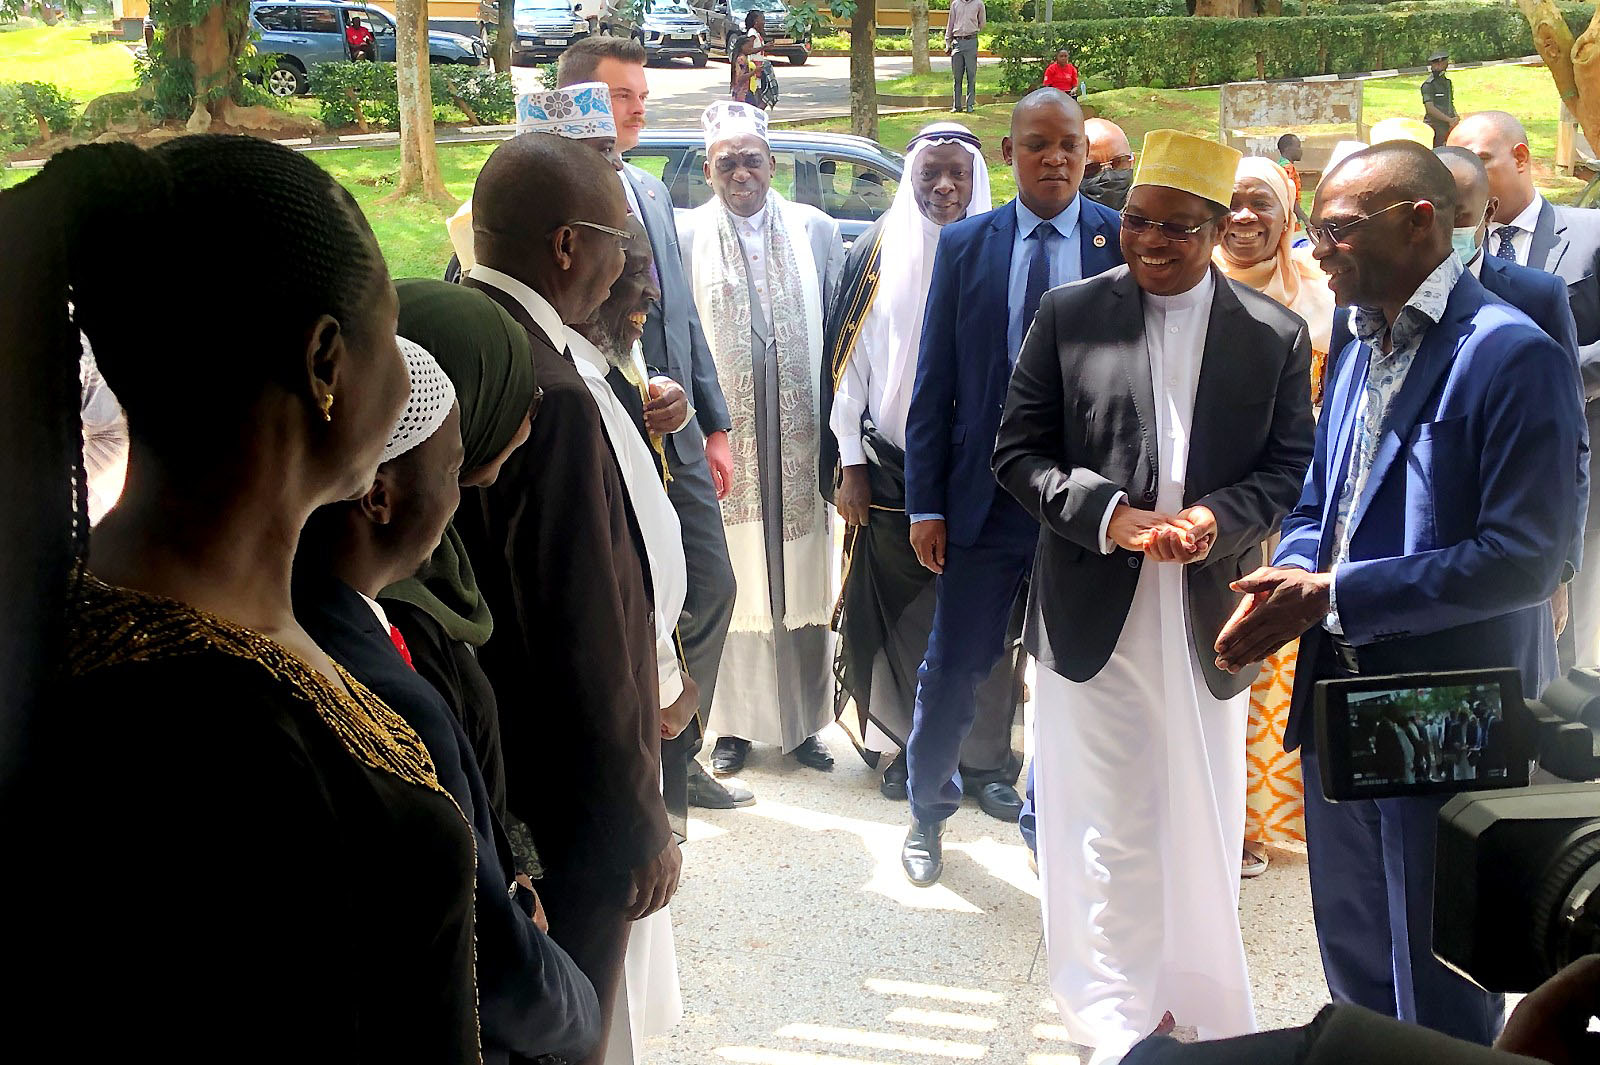 The Tanzanian Prime Minister-Rt. Hon. Kassim Majaliwa Majaliwa (2nd Right) is received upon arrival at Makerere University to preside over the Islam@75 and MUMSA@50 celebrations by the Acting Vice Chancellor-Prof. Umar Kakumba (Right) and other officials on 17th December 2022.